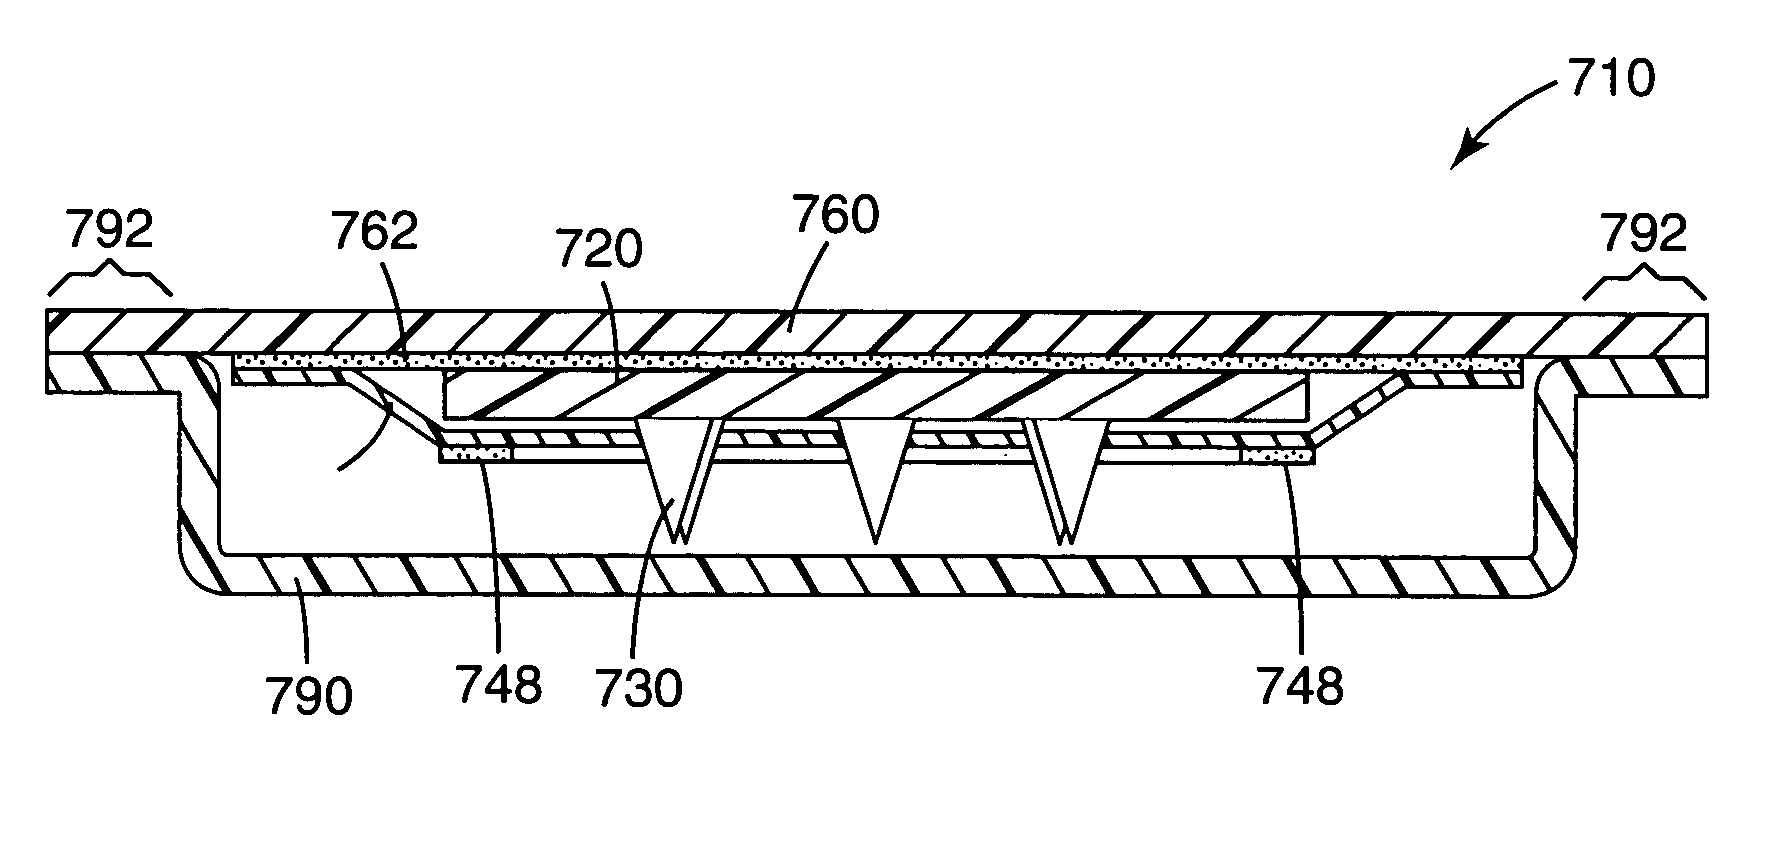 Microneedle devices and methods of manufacture